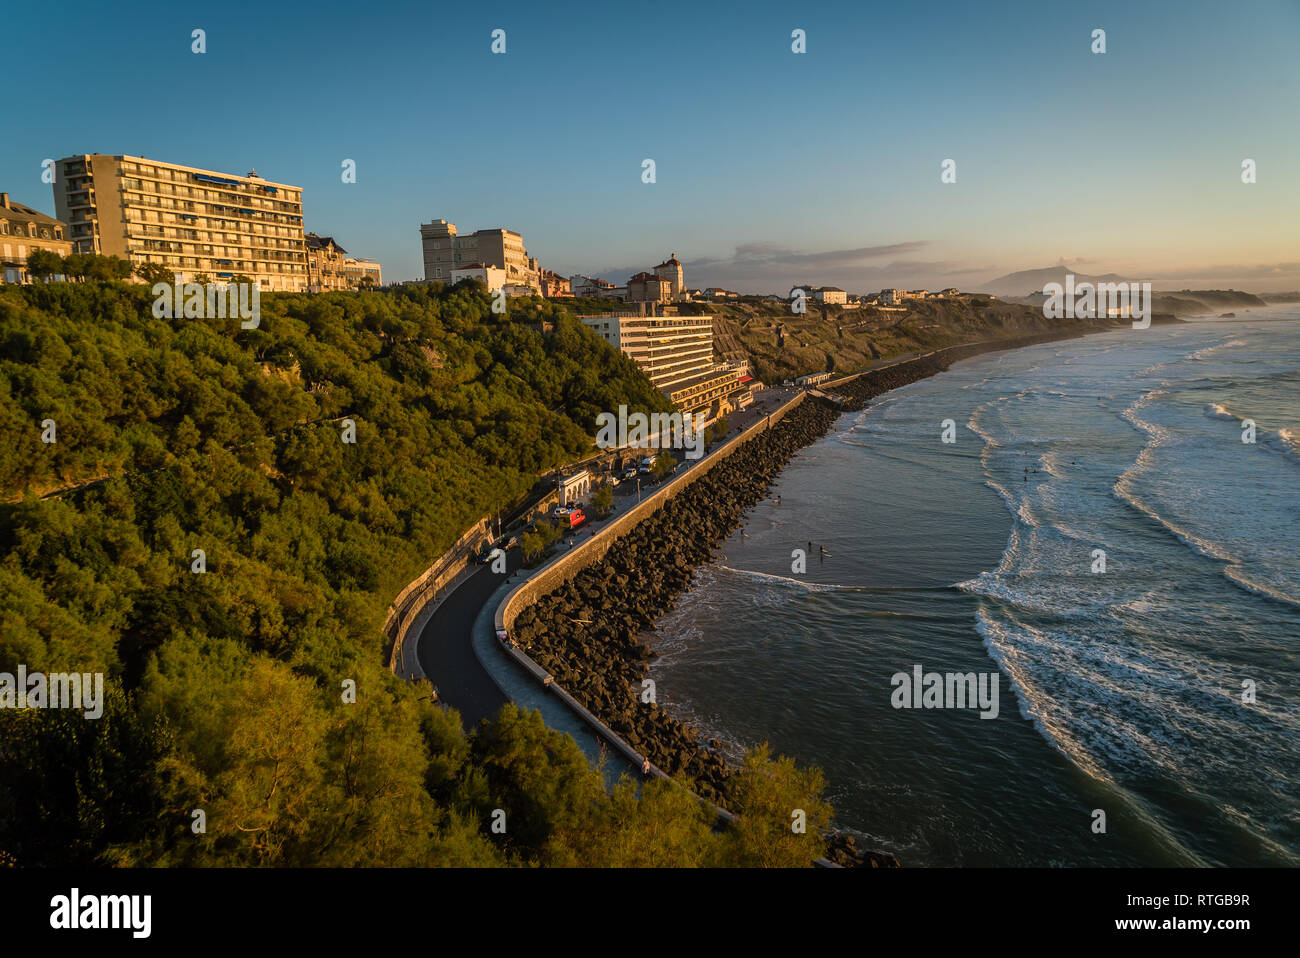 Cote des basques at sunset in Biarritz, France Stock Photo